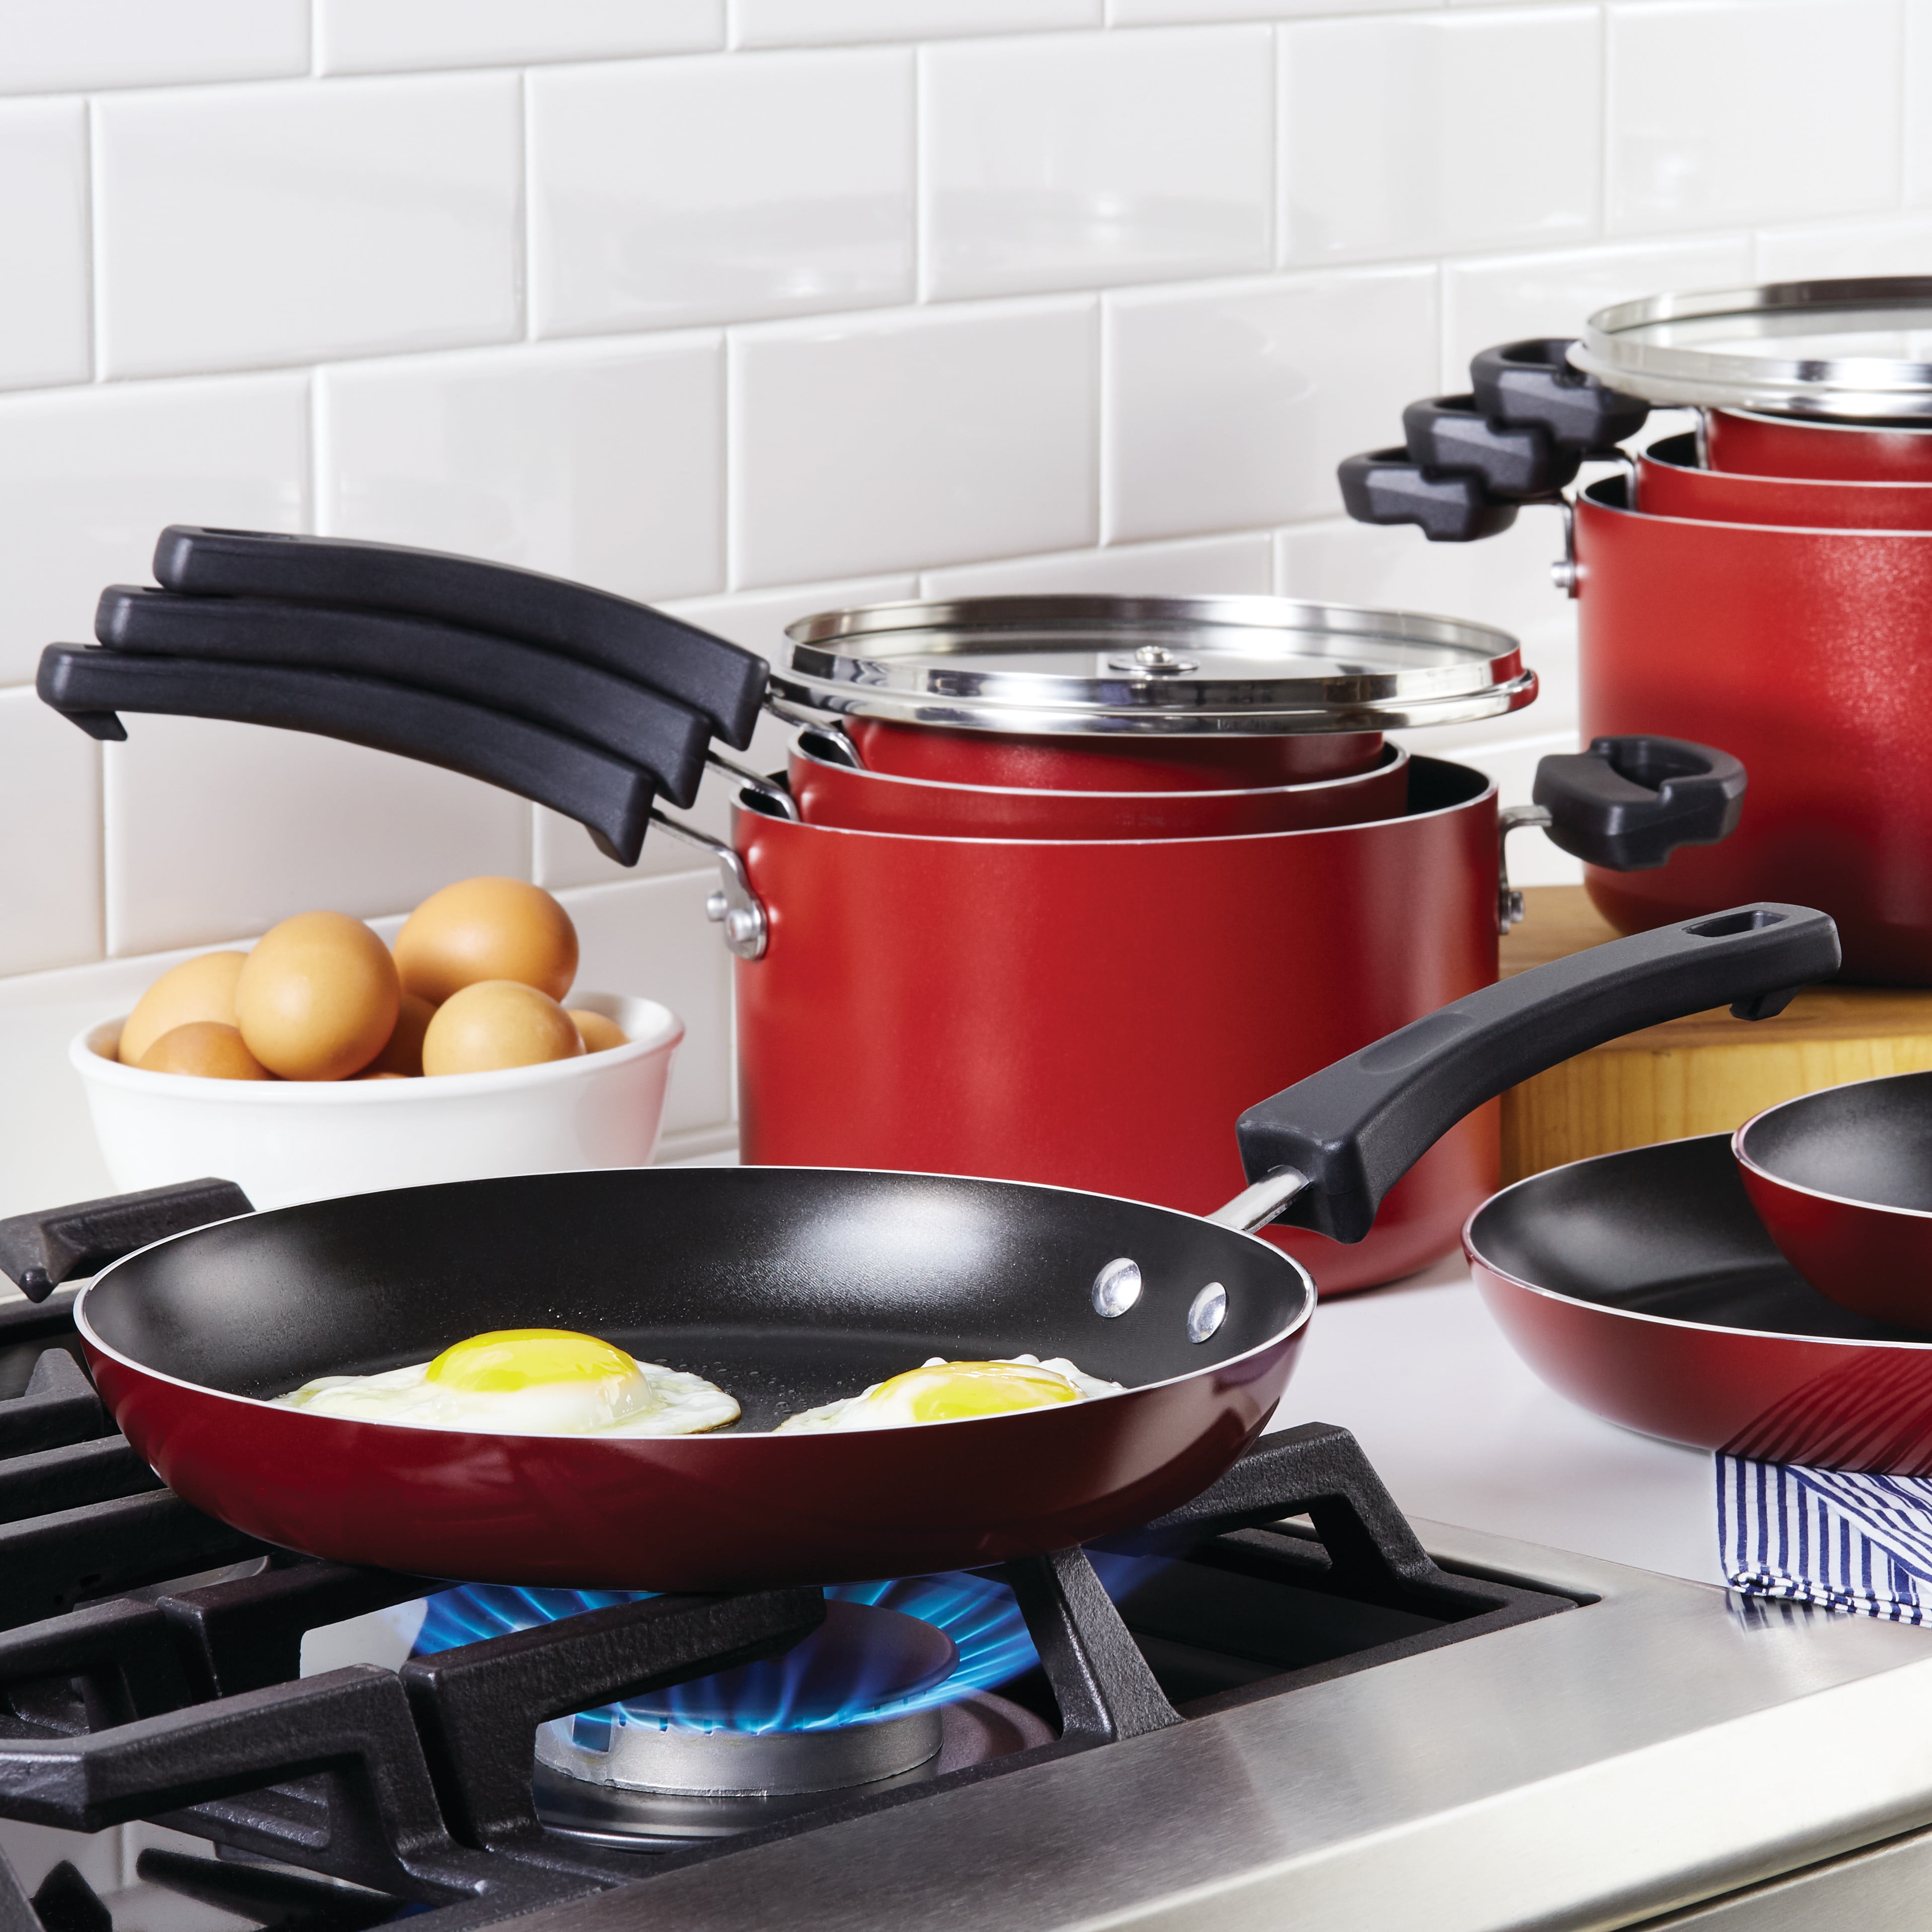 How to Choose the Best Cookware Brands for Your Kitchen in 2023